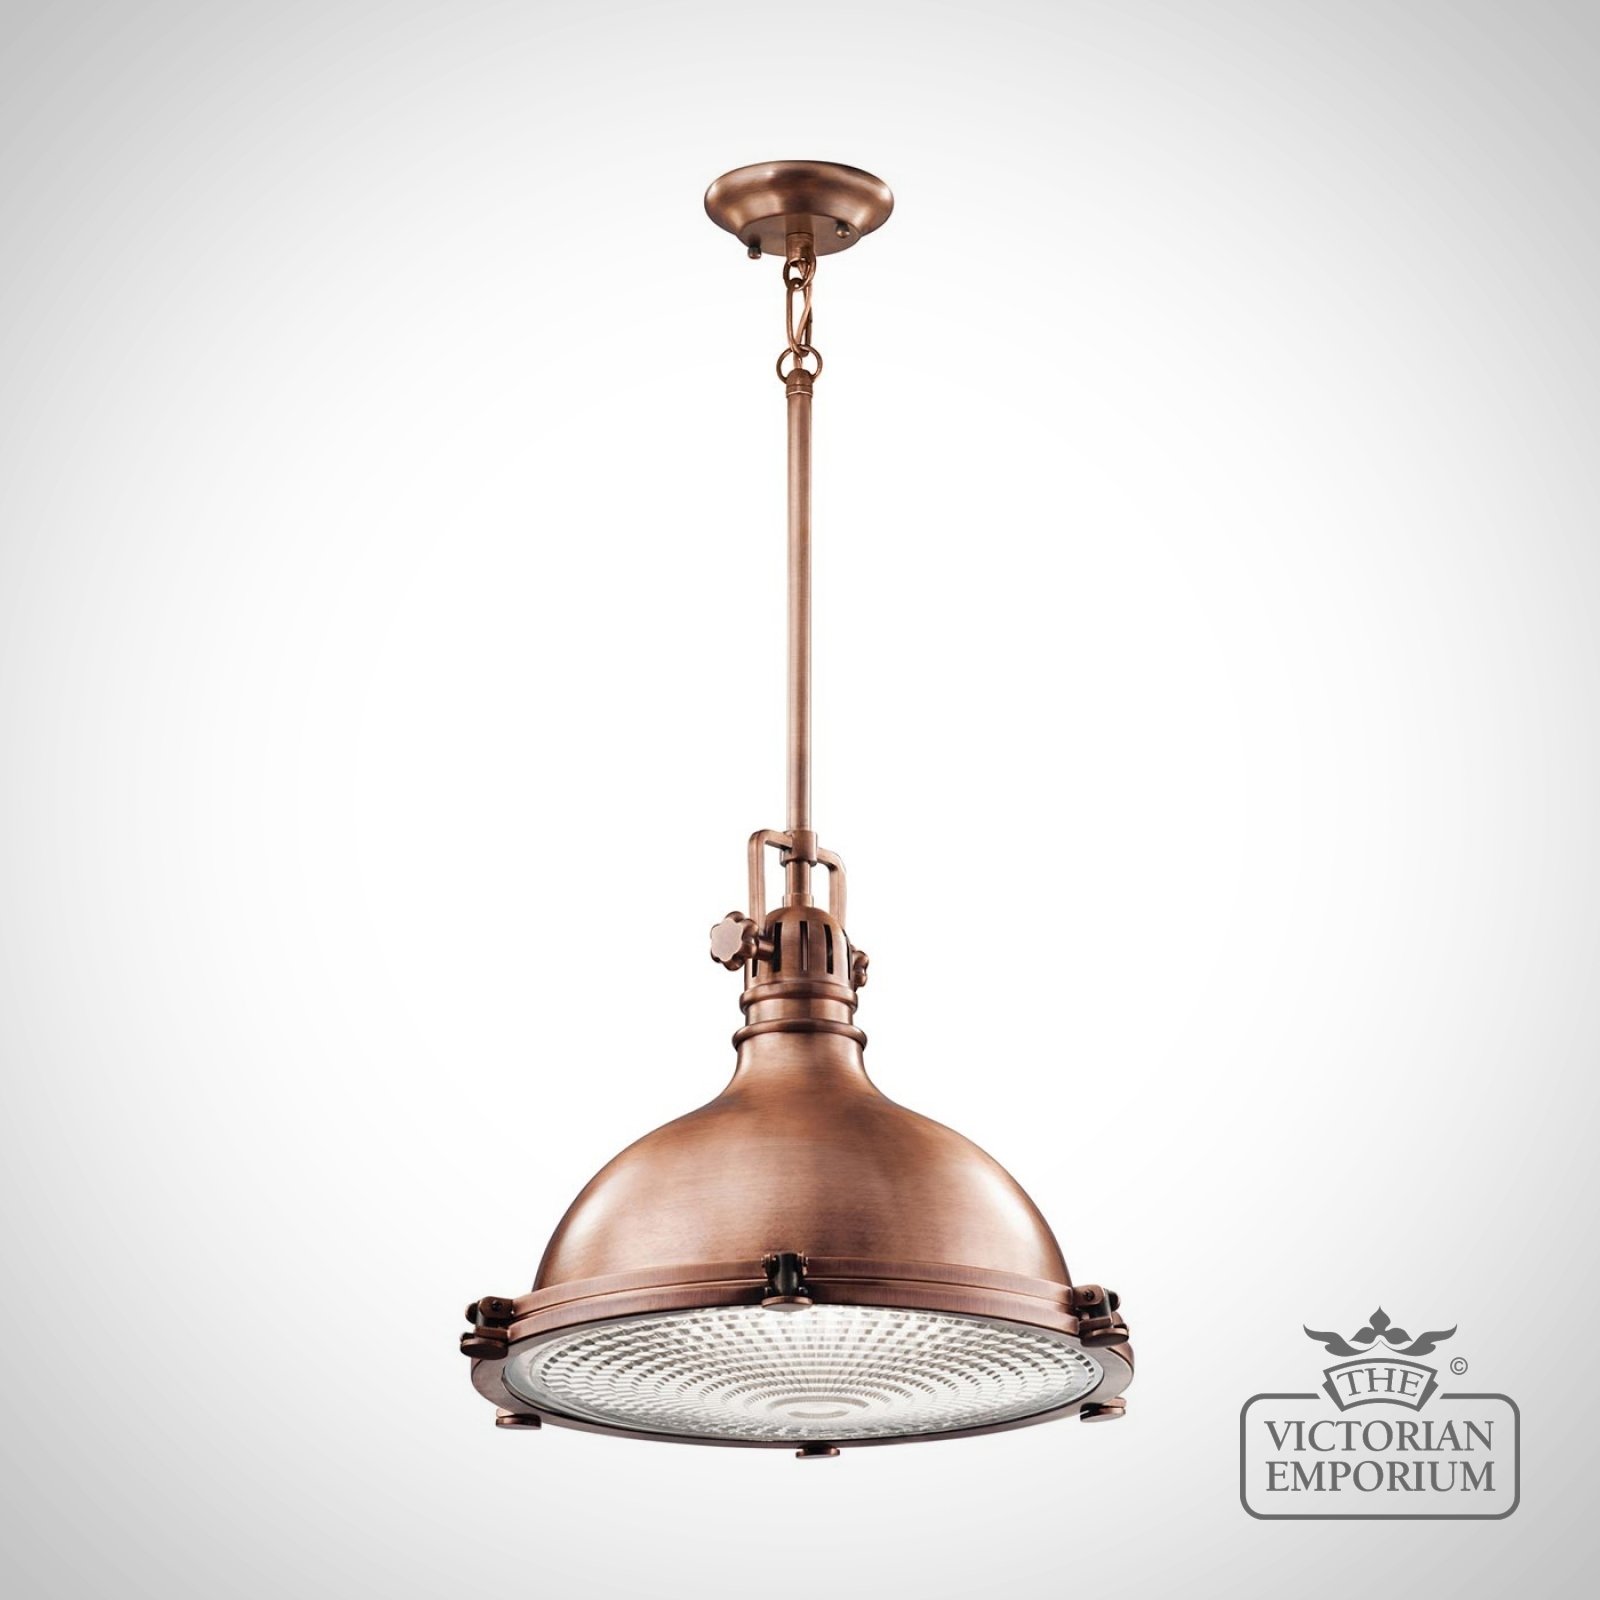 Hatters Bay Large Pendant in Antique Copper